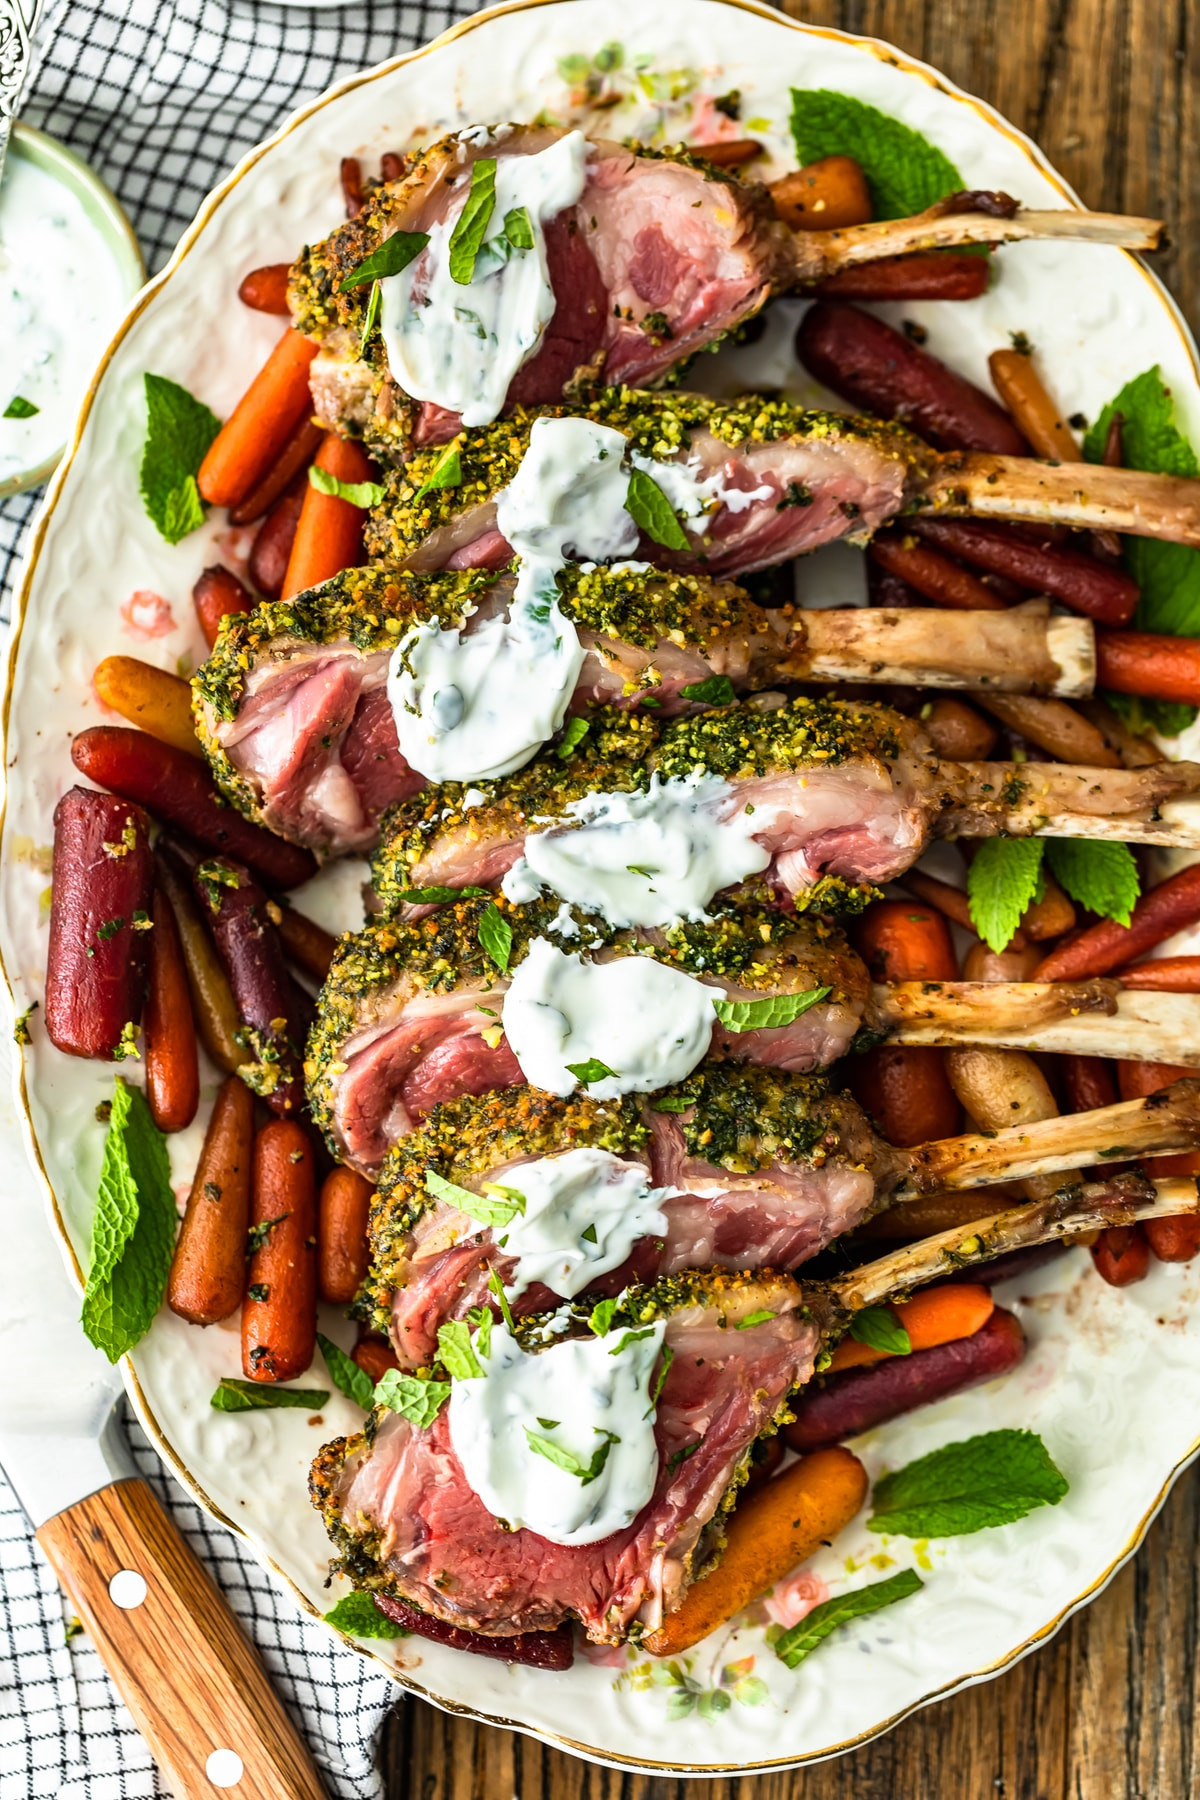 Side Dishes To Go With Lamb
 Herb Crusted Rack of Lamb Recipe with Mint Yogurt Sauce